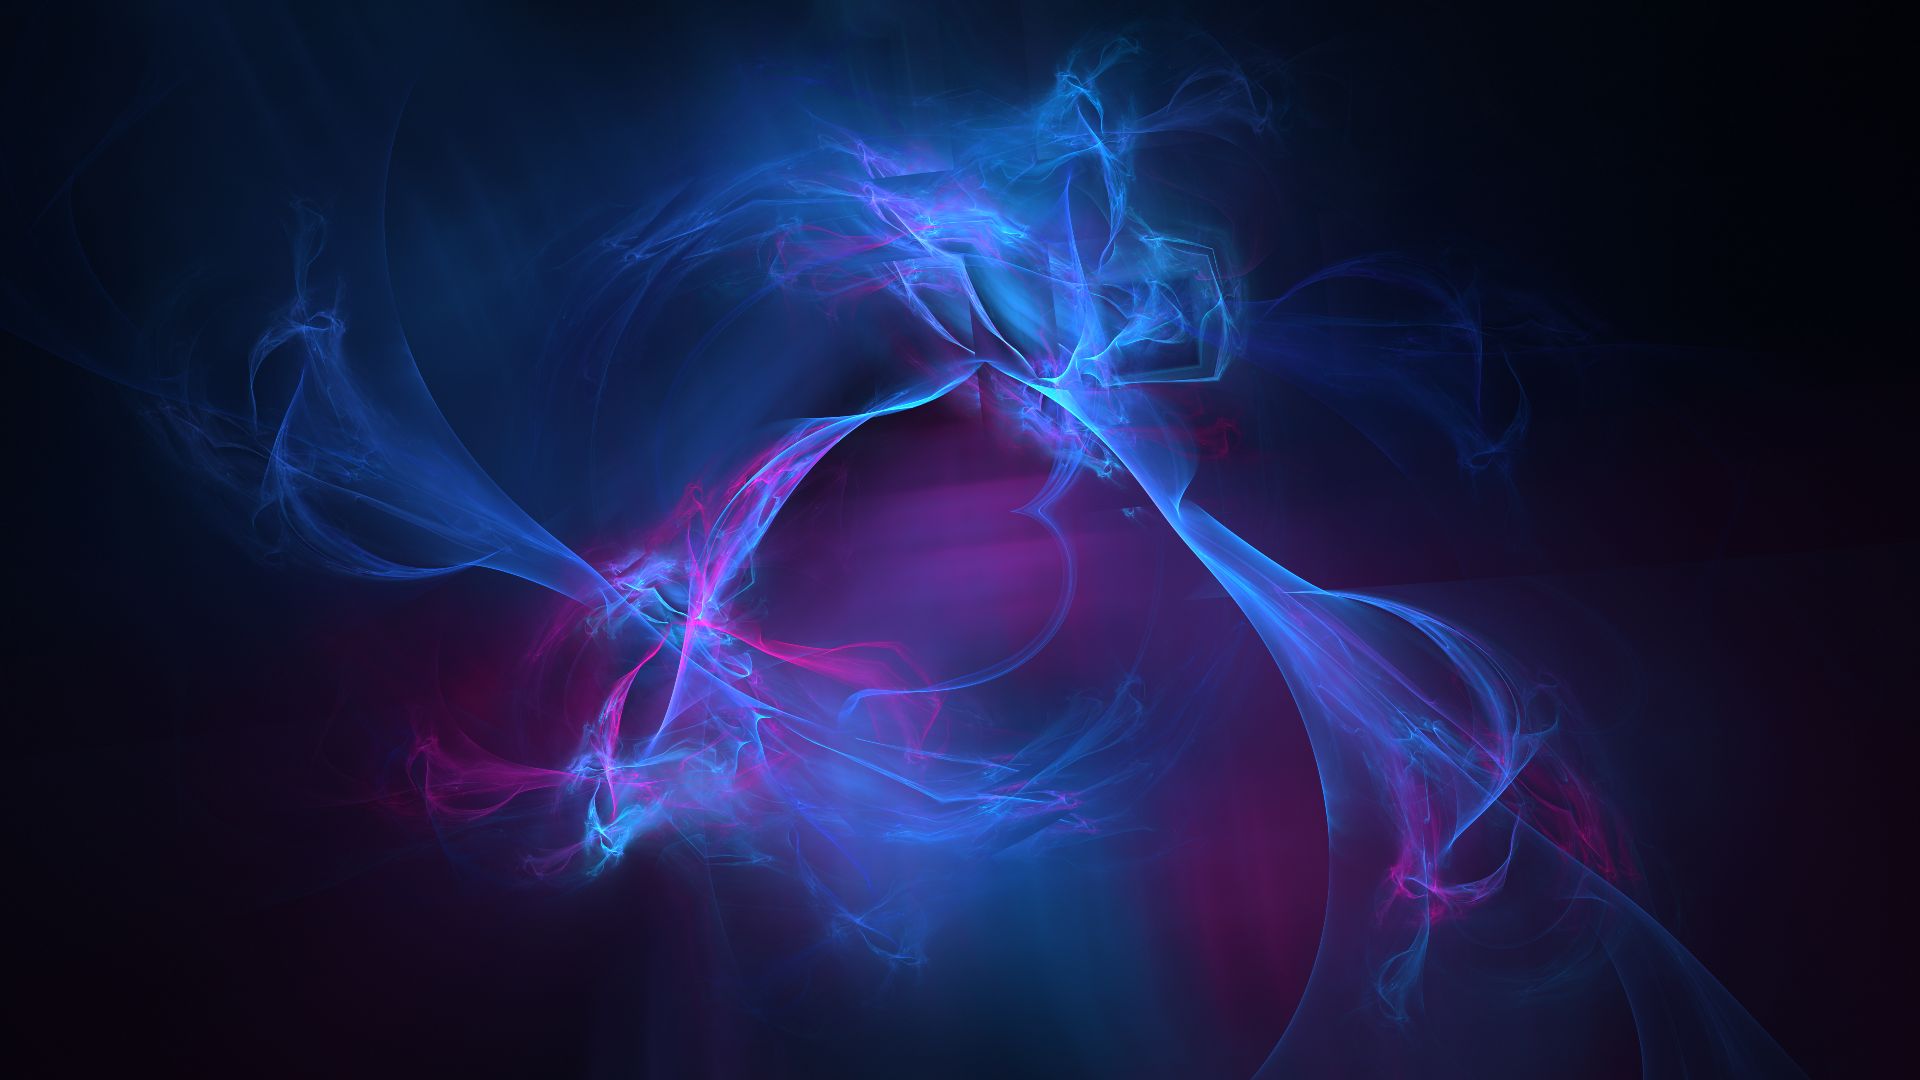 space, fractal, plasma, blue home screen for smartphone